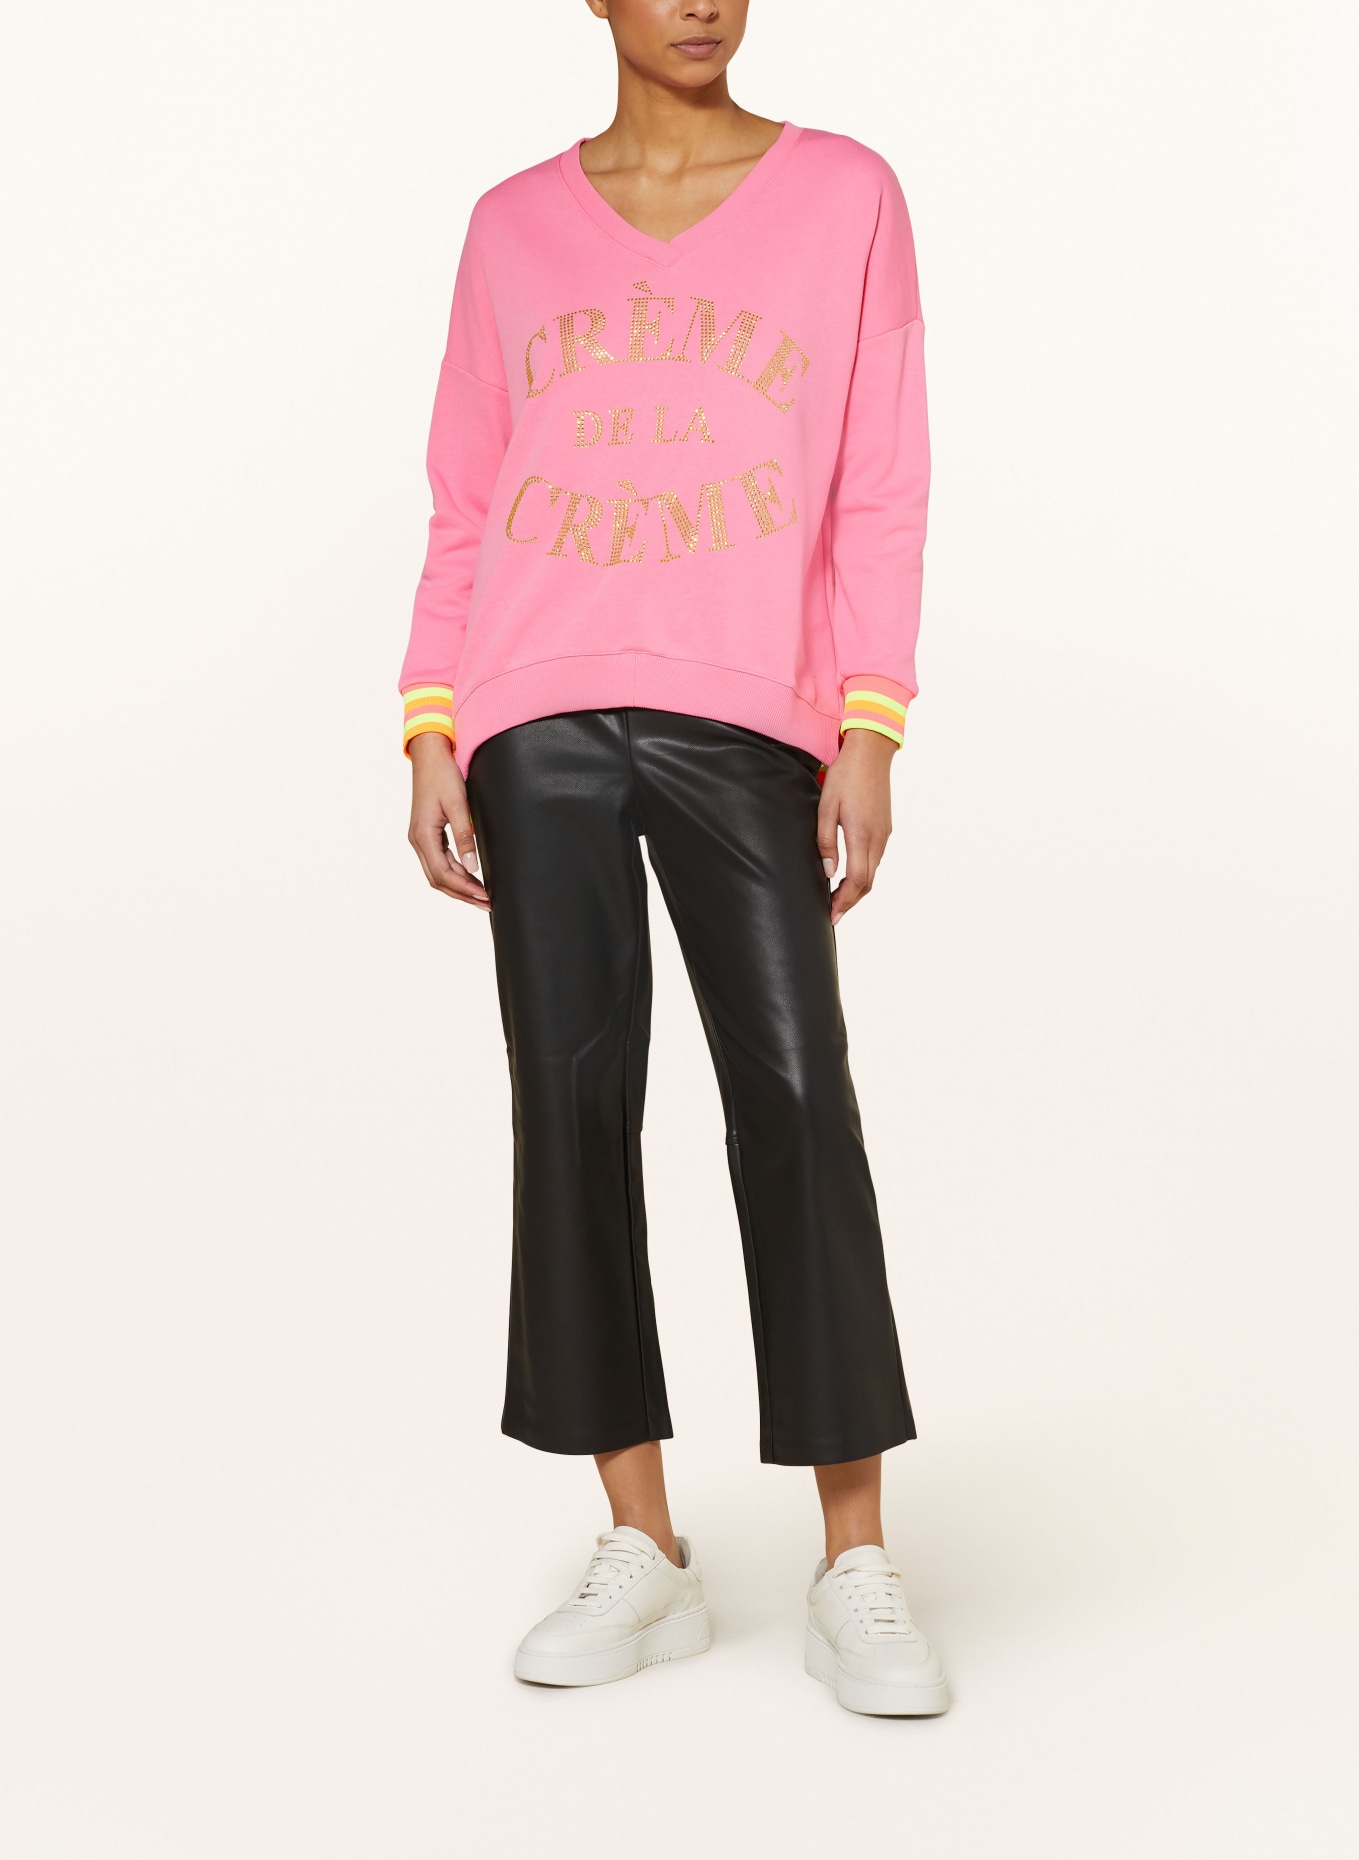 miss goodlife Sweatshirt with decorative gems, Color: PINK (Image 2)